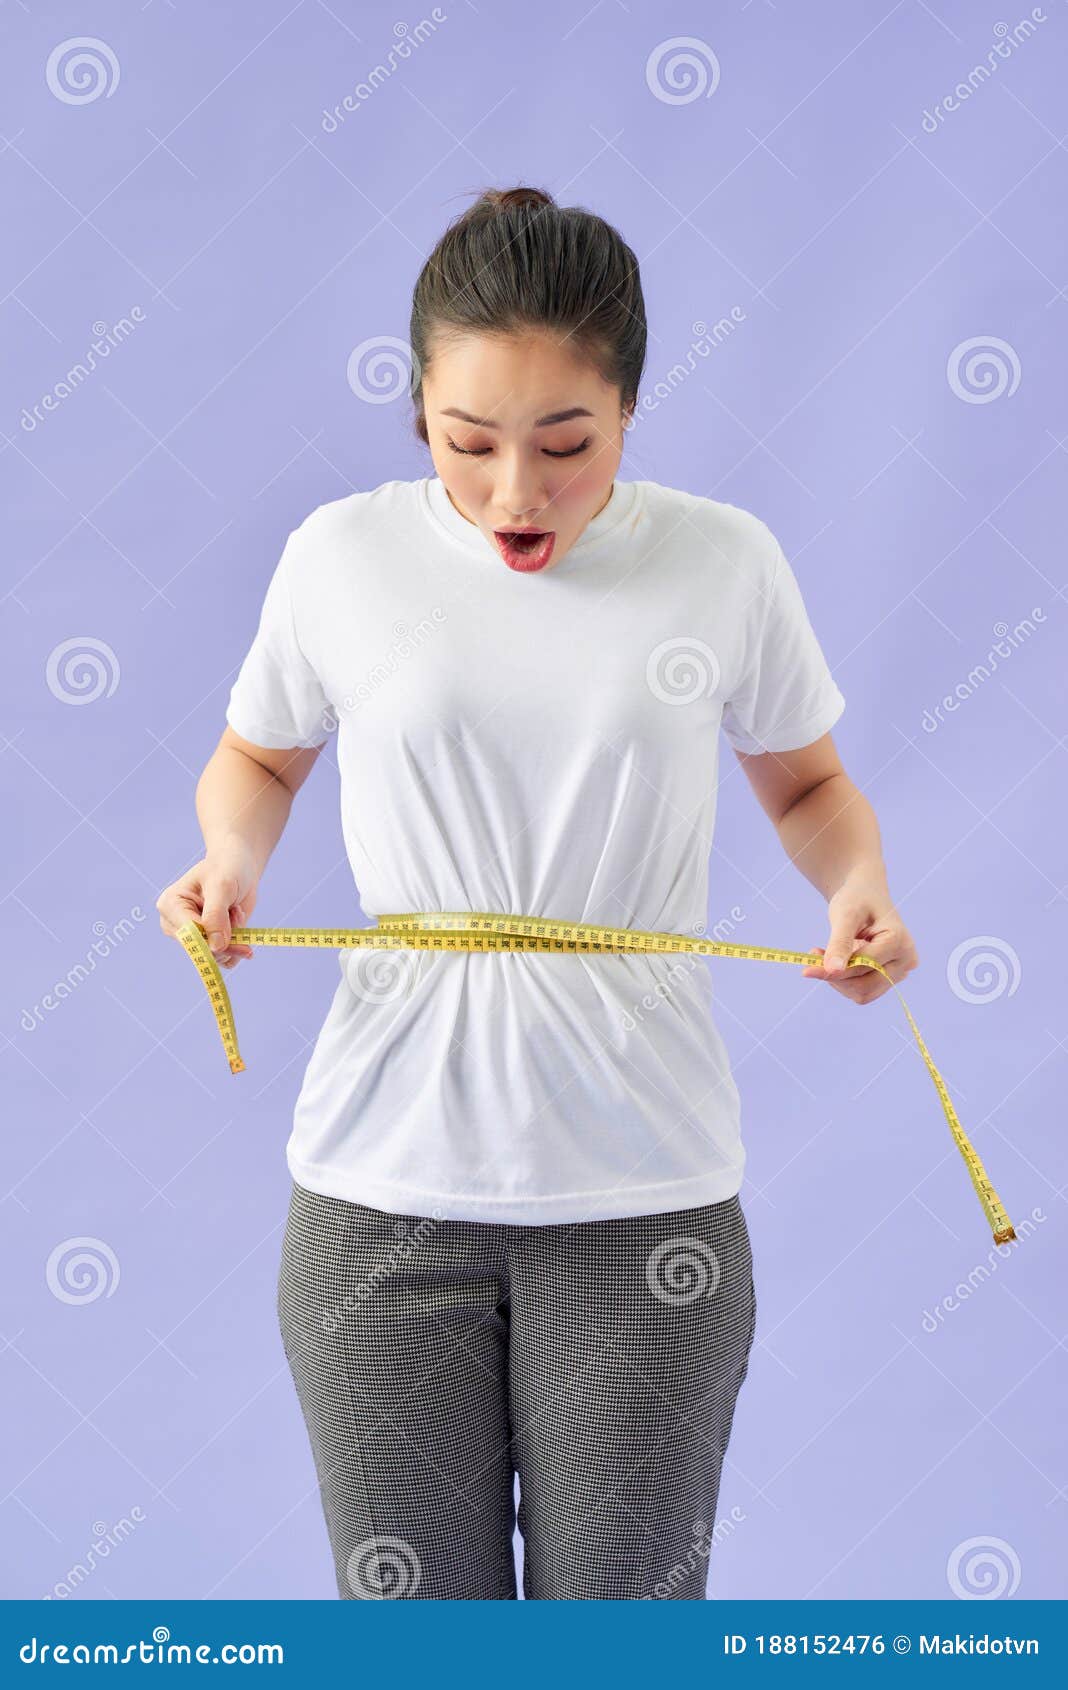 Young Woman Measuring Waist with Measuring Tape Stock Photo - Image of ...